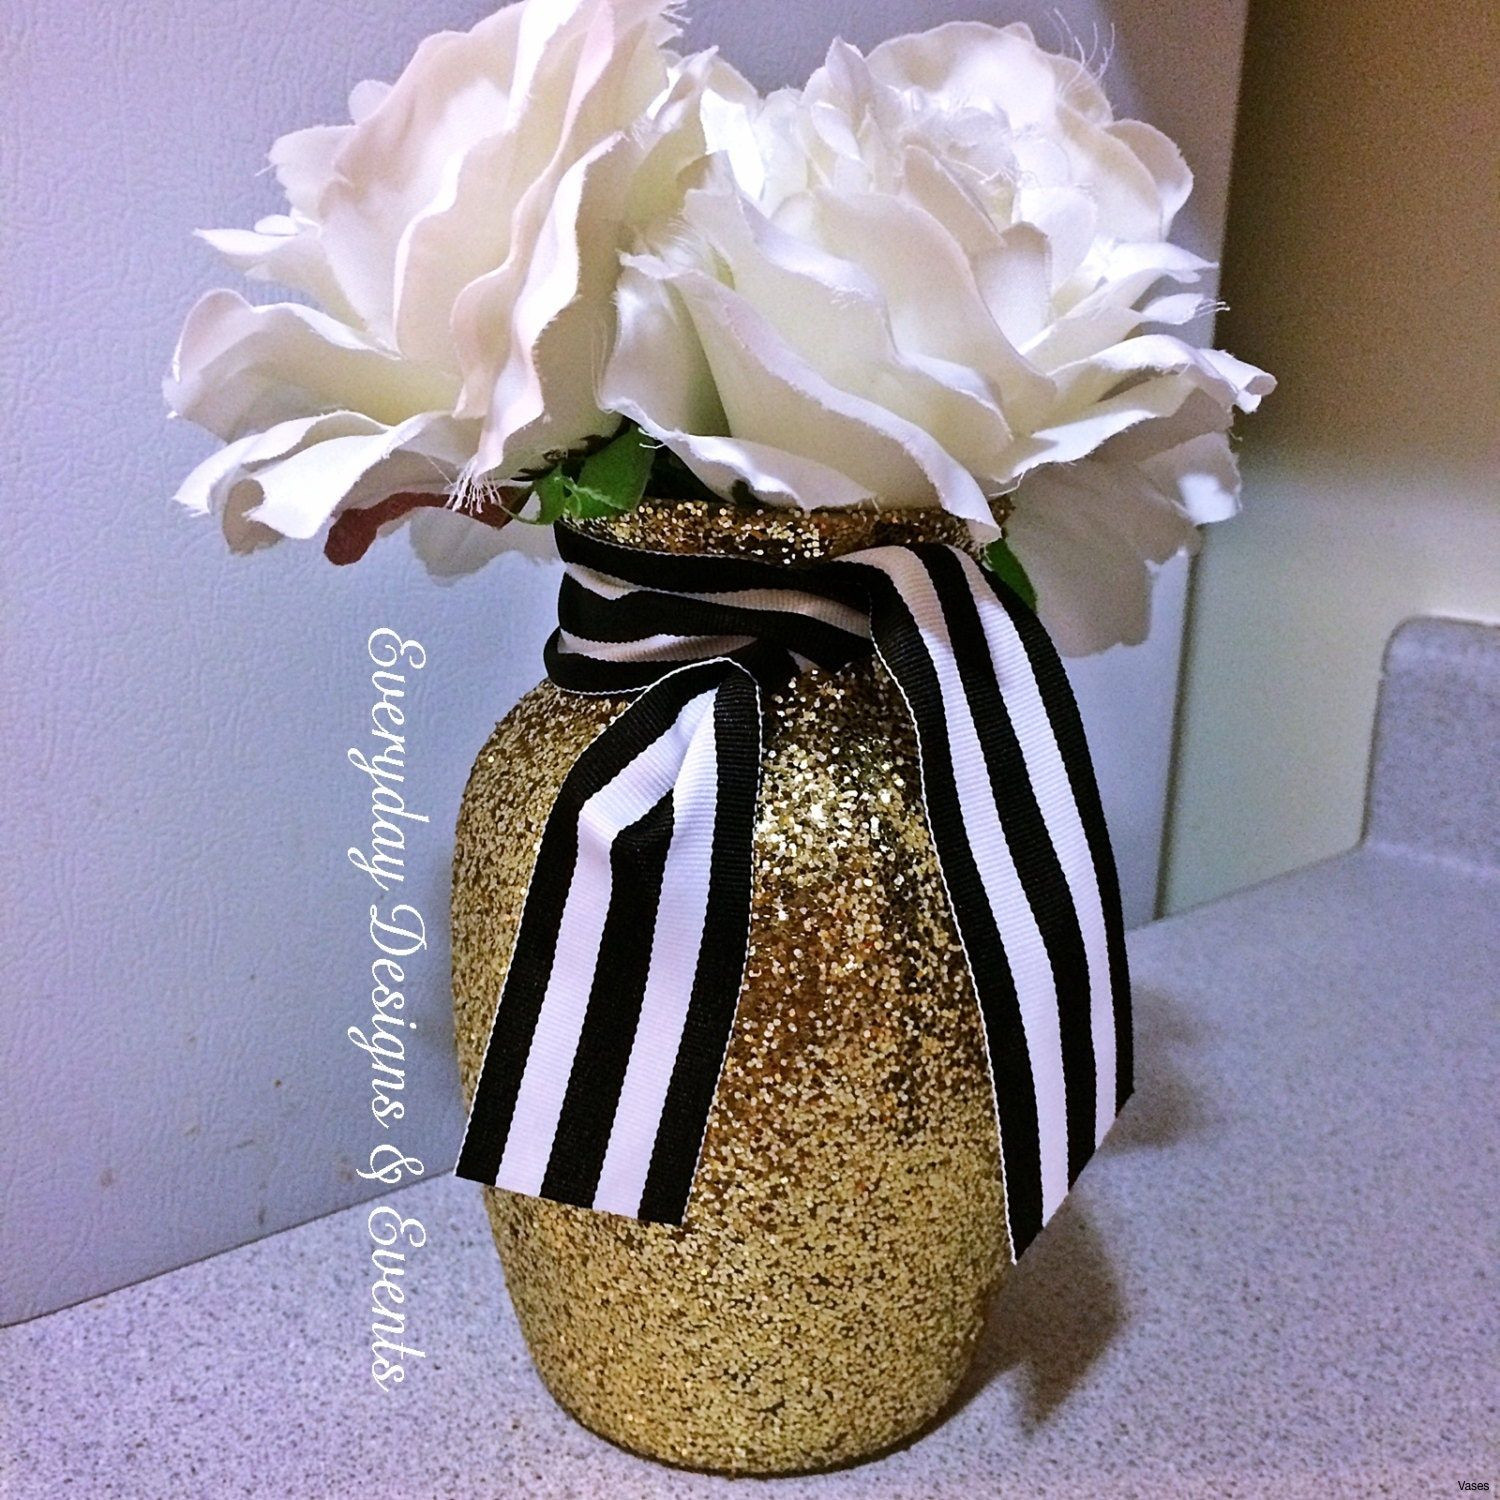 20 Nice Mason Jar Vases with Ribbon 2023 free download mason jar vases with ribbon of white and gold vase awesome luxury flower picture in black and white throughout white and gold vase awesome luxury flower picture in black and white